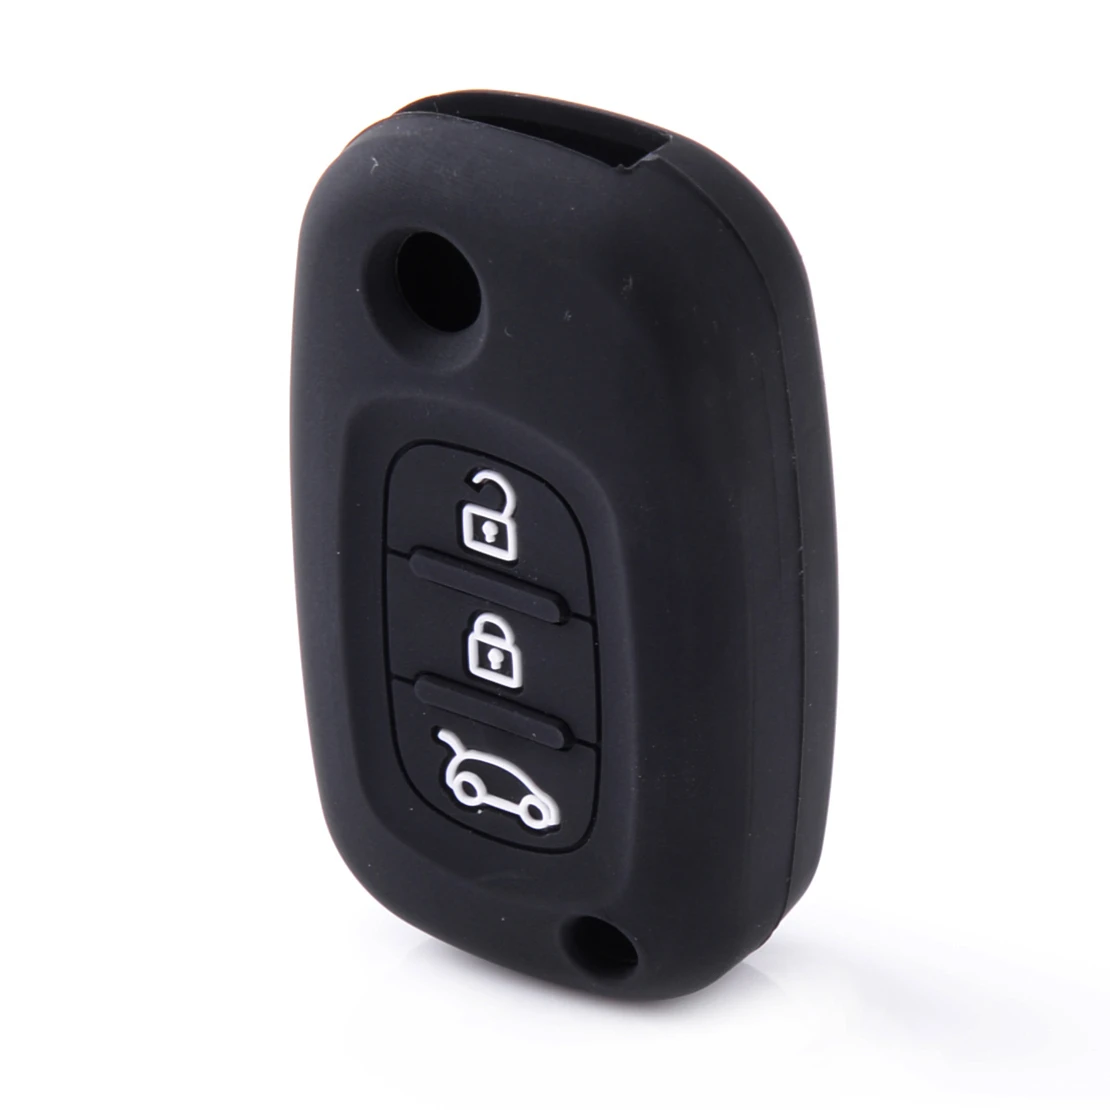 Silicone 3 Button Remote Key Fob Cover Case For Renault Kangoo Fluence Megane